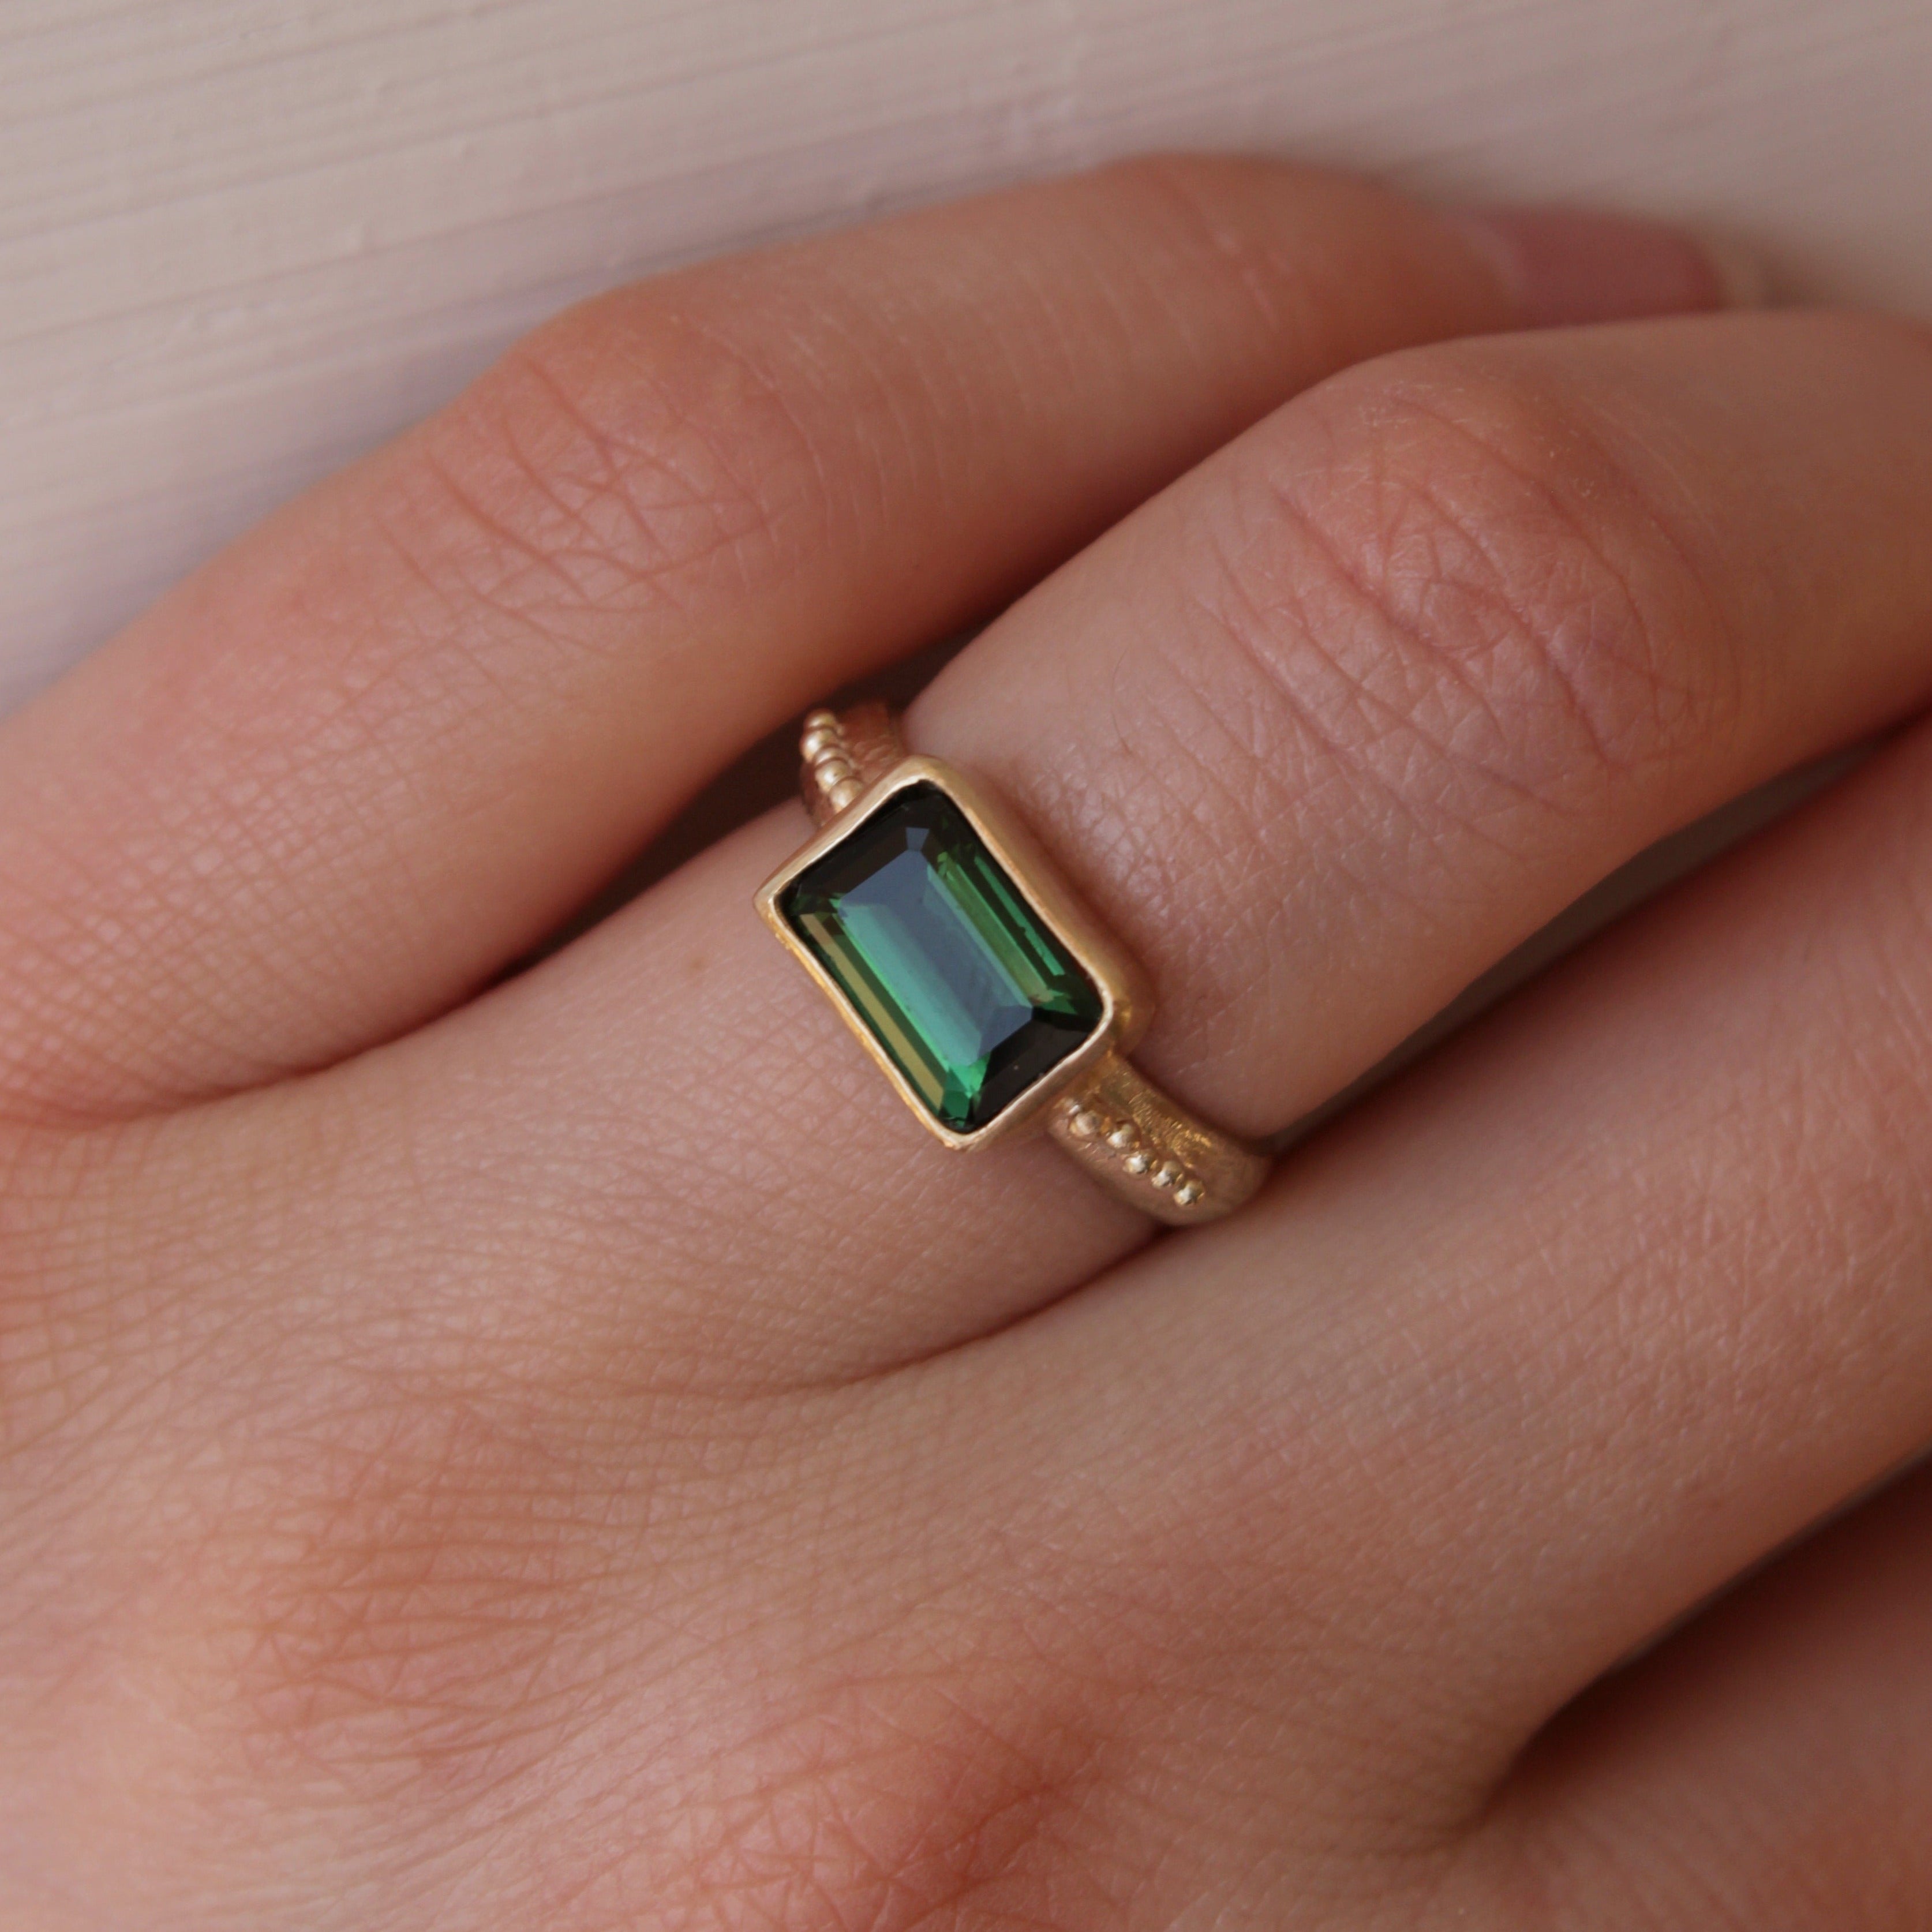 A stunning Green Tourmaline stone set on a 9 ct gold band. The band features an organic textures with tinny gold granules delicately framing the centrepiece stone.. Hand crafted alternative engagement ring by Josie Mitchell jewellery. Made in Frome, Somerset.